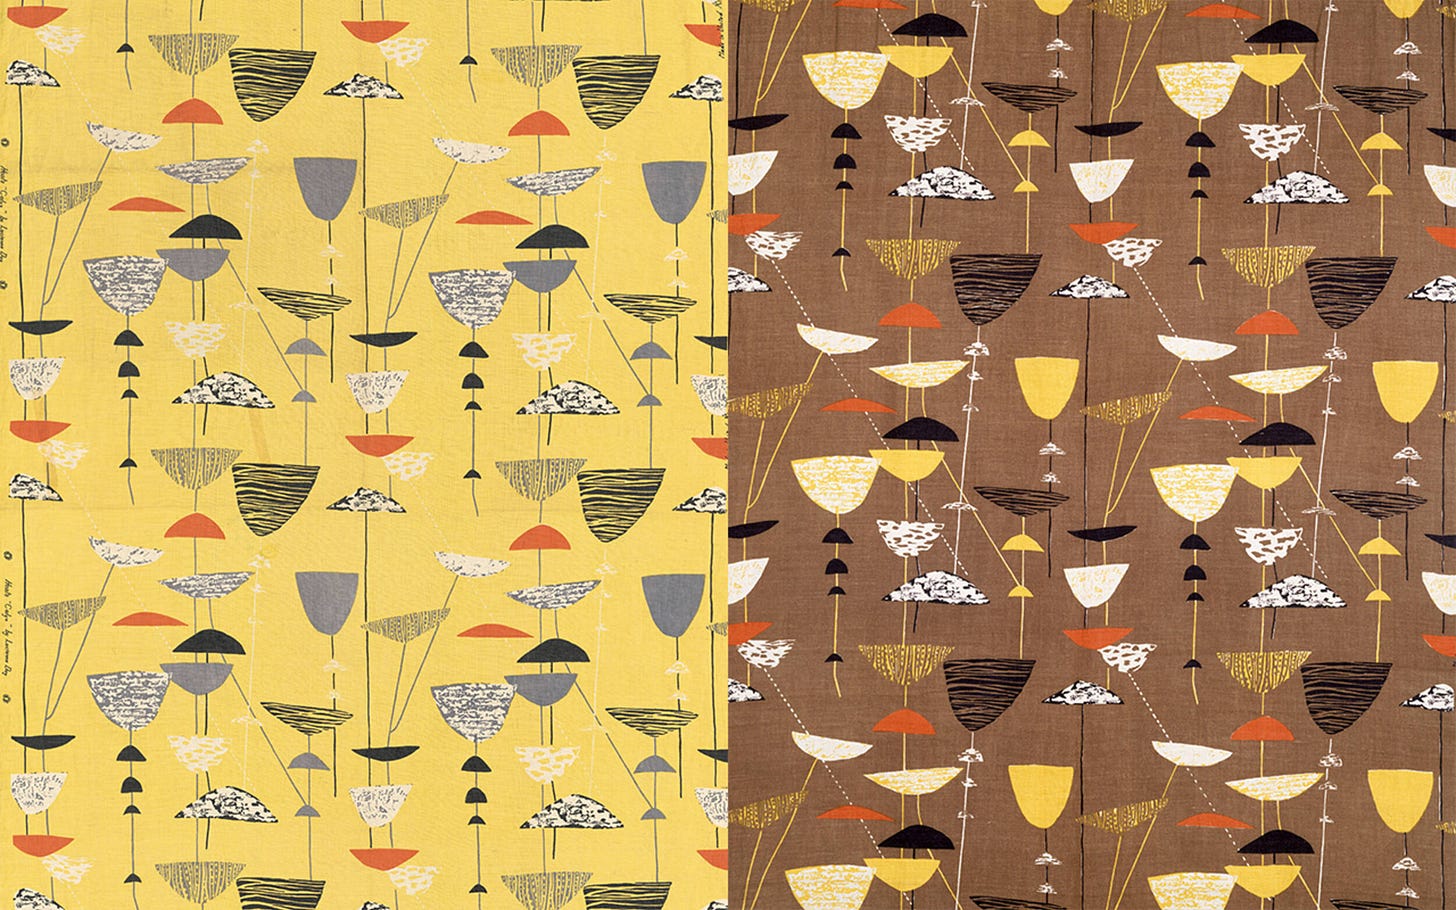 Calyx pattern fabric by Lucienne Day, 1951, © Robin and Lucienne Day Foundation. Victoria and Albert Museum, London.